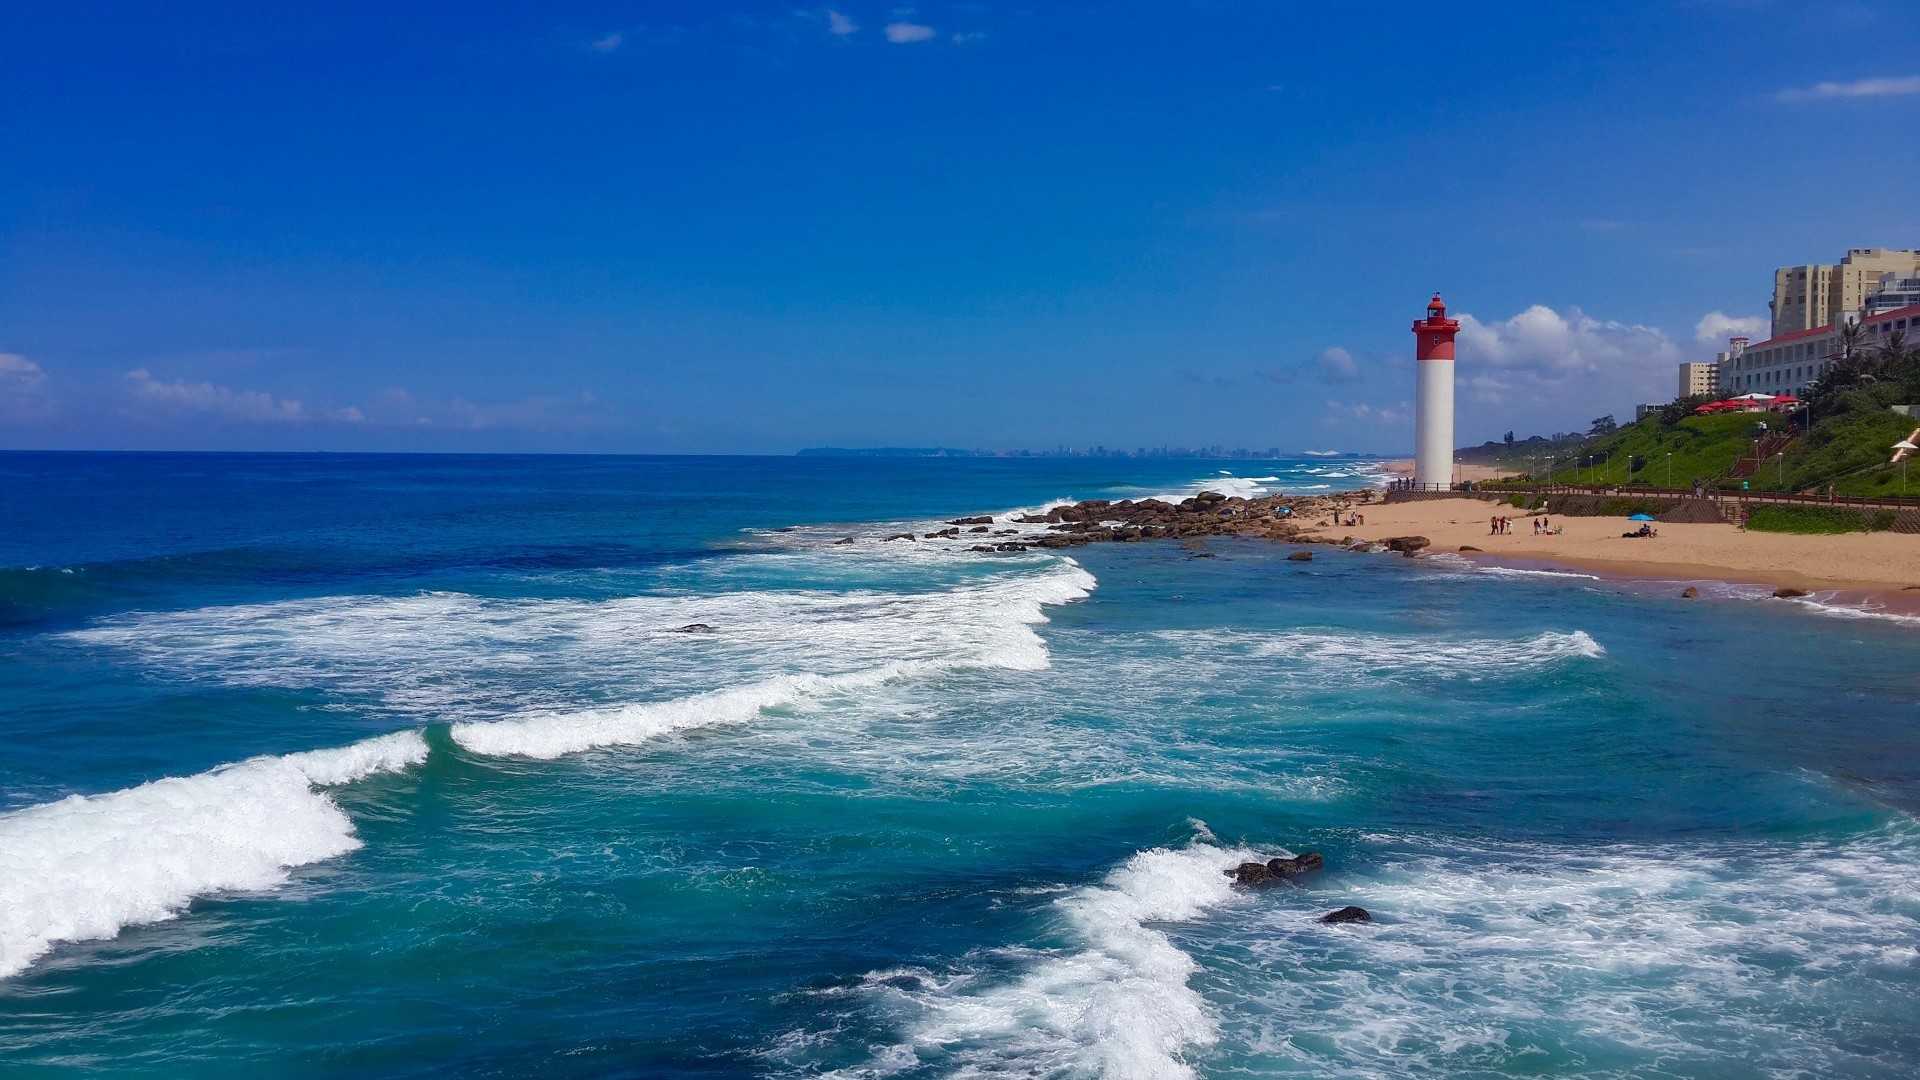 turquoise water beach and lighthouse on beach in South Africa at Umhlanga Rocks